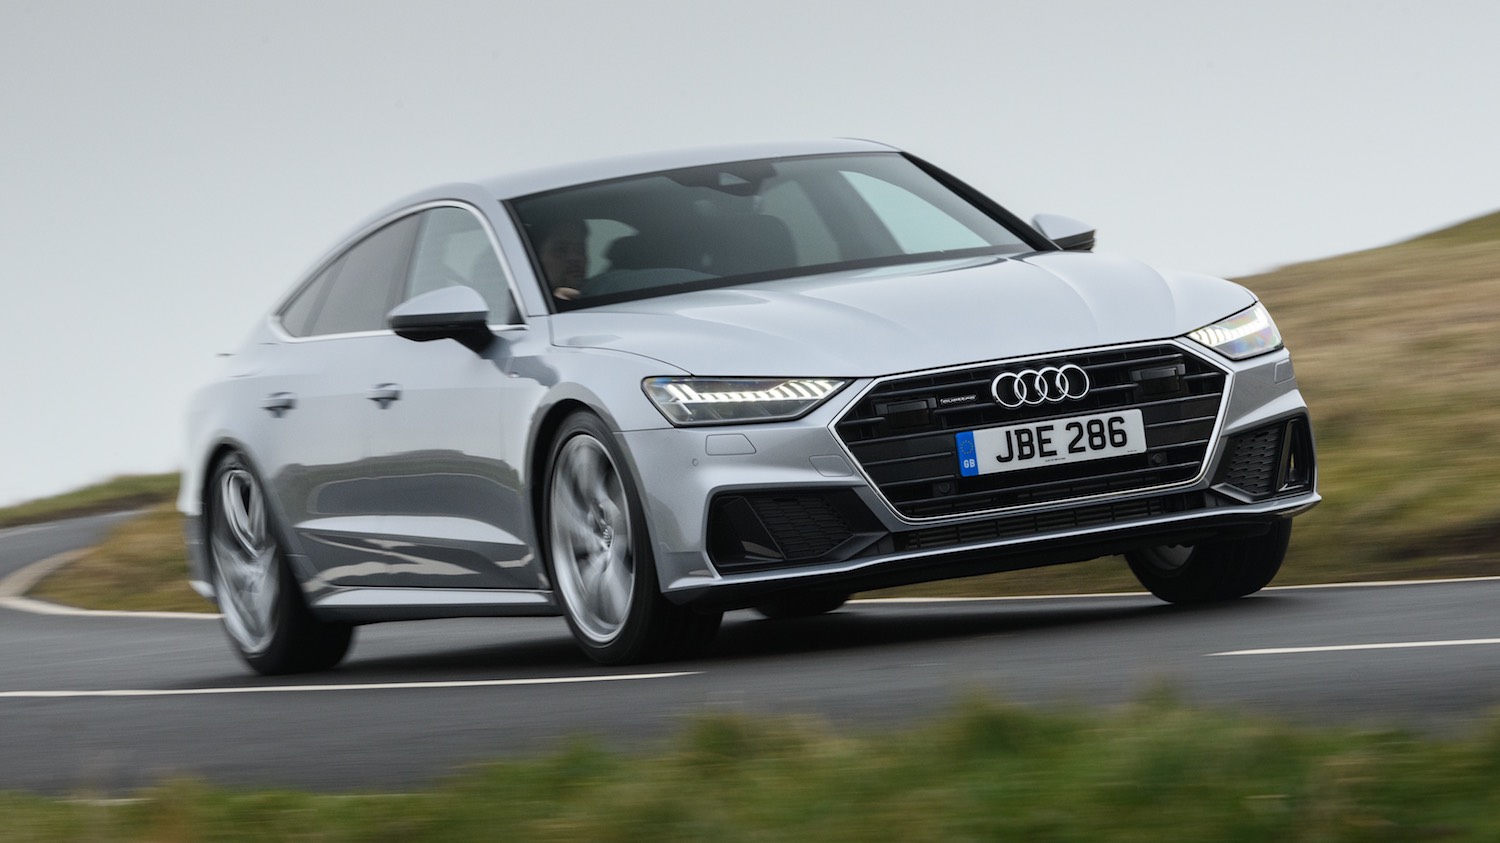 Neil Lyndon motoring correspondent reviews the latest Audi A7 for Drive 11